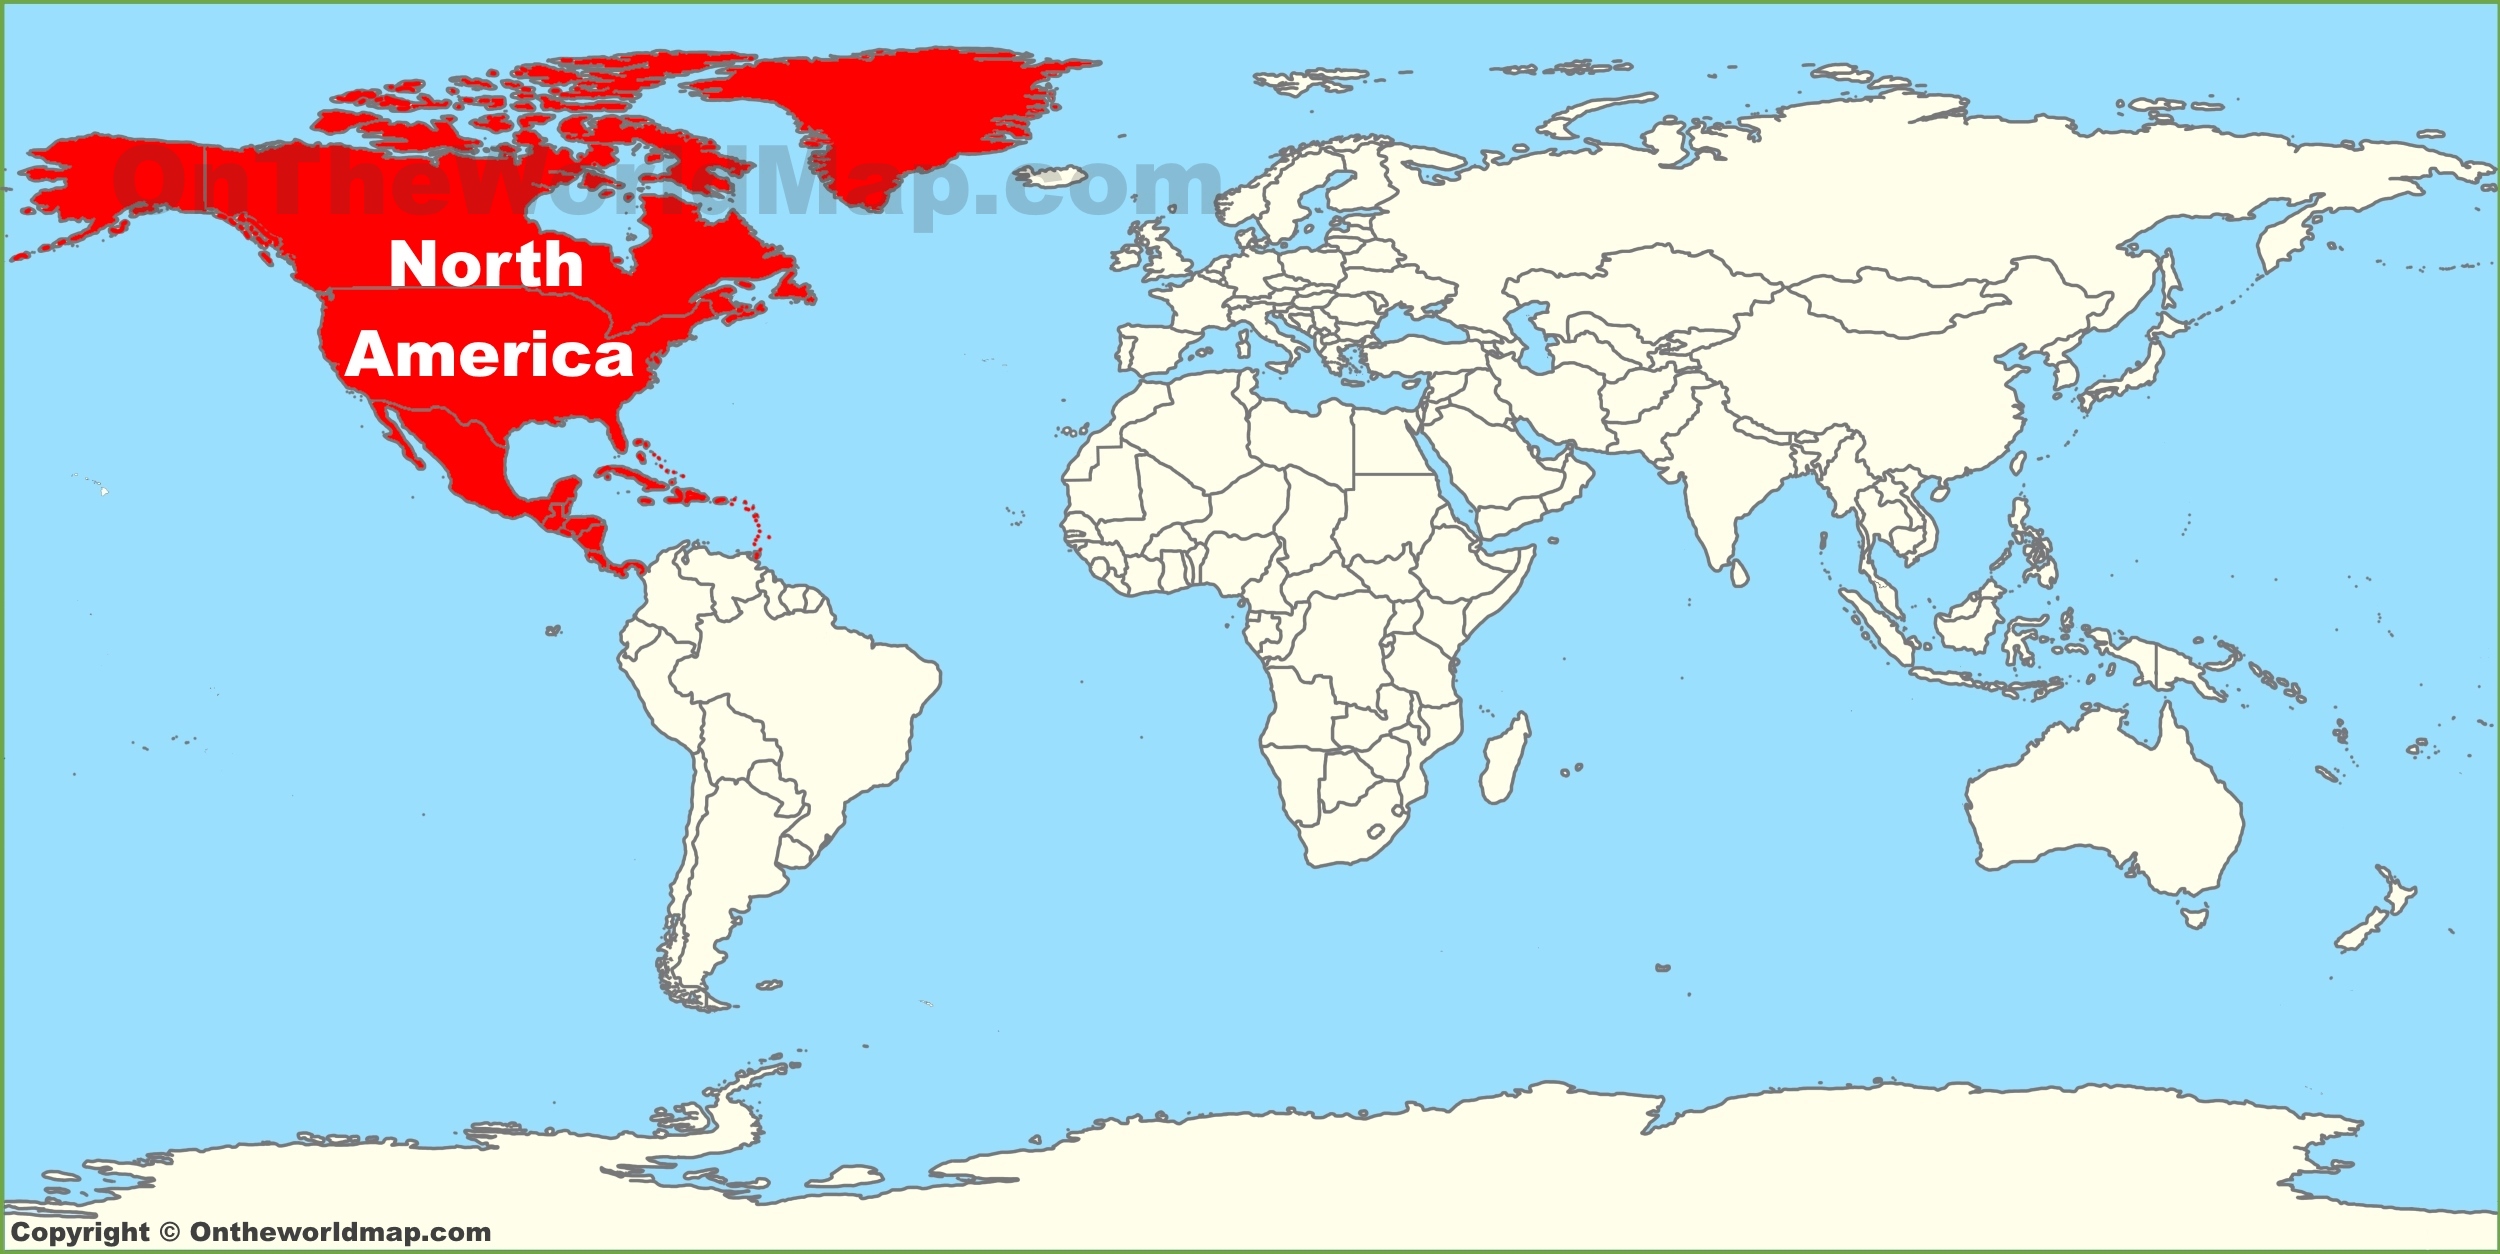 North America Location On The World Map